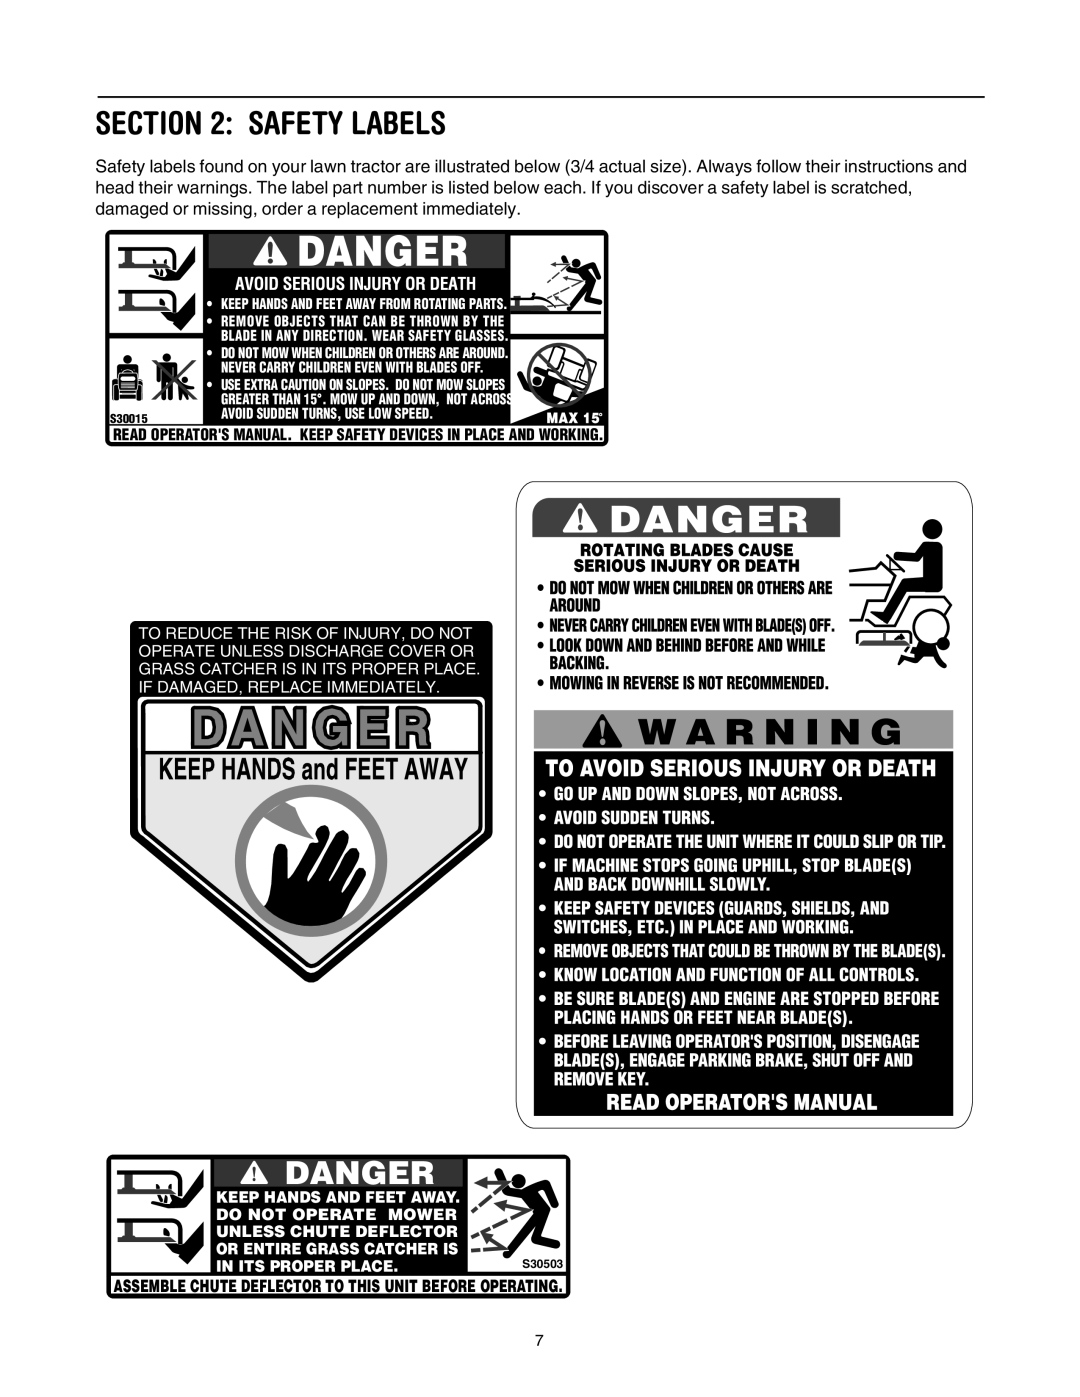 Toro LX500 Safety Labels, Danger, Read Operators Manual. Keep Safety Devices In Place And Working, Do Not Operate Mower 